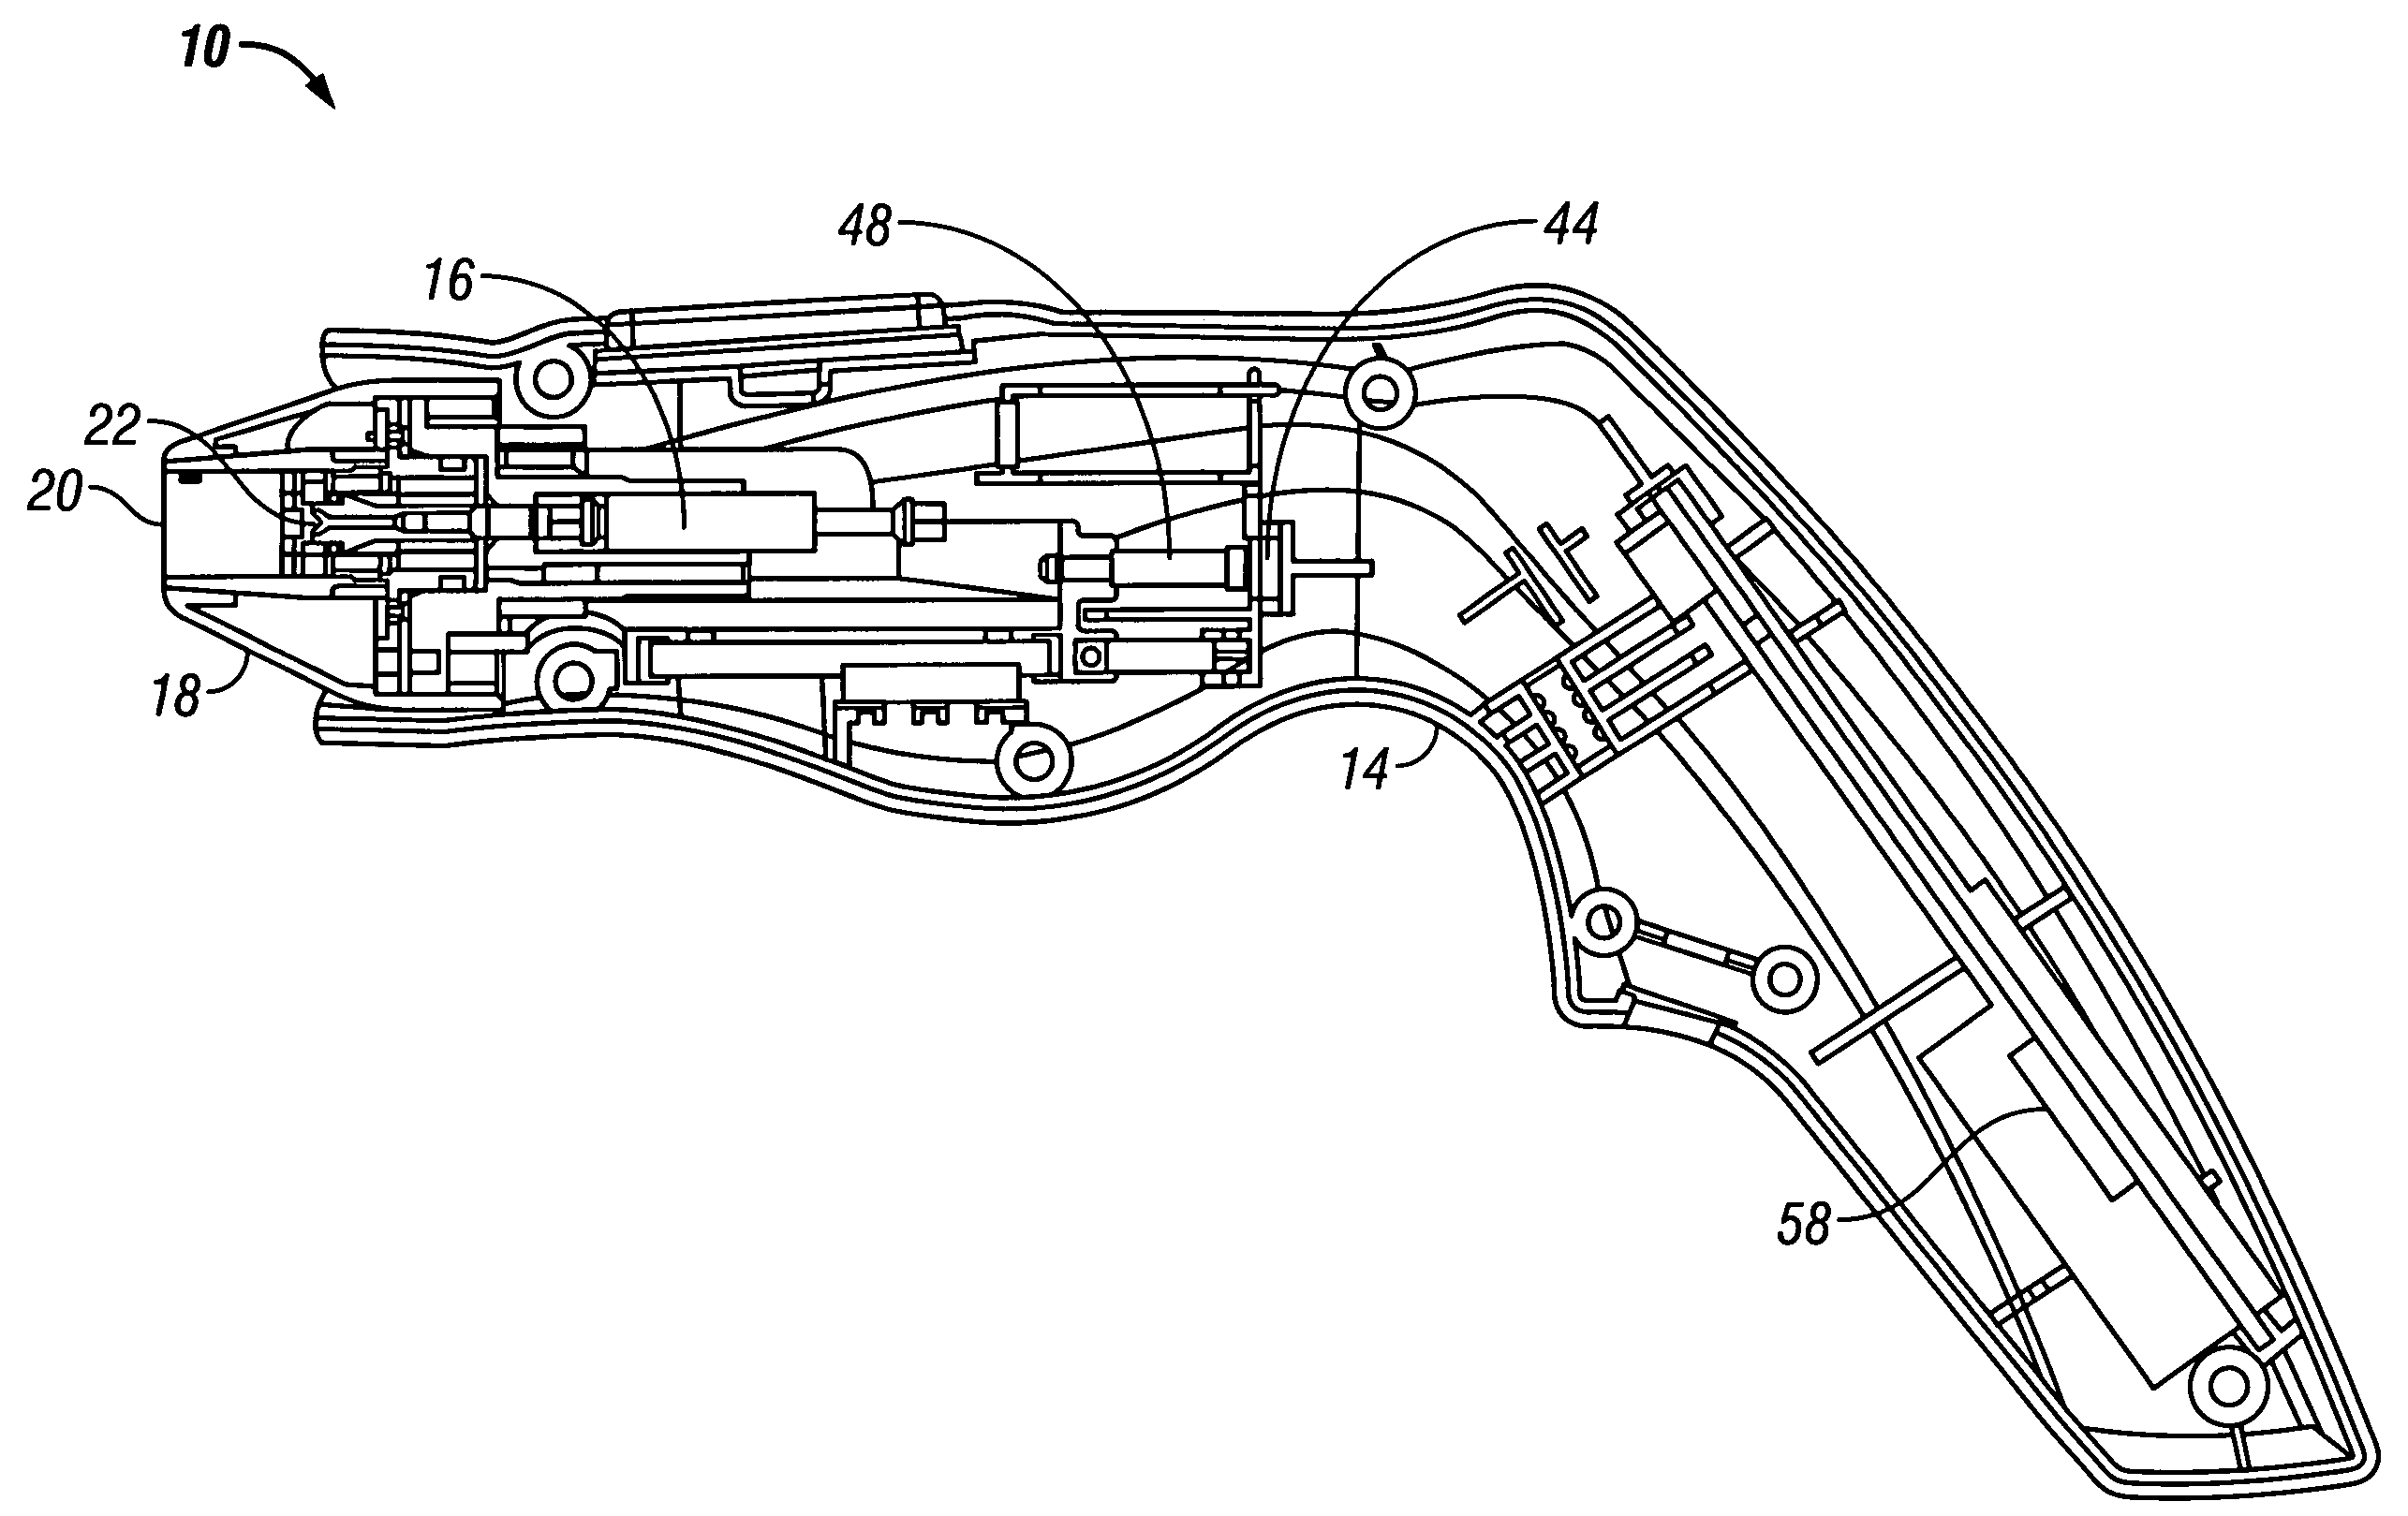 Handpiece with electrode and non-volatile memory